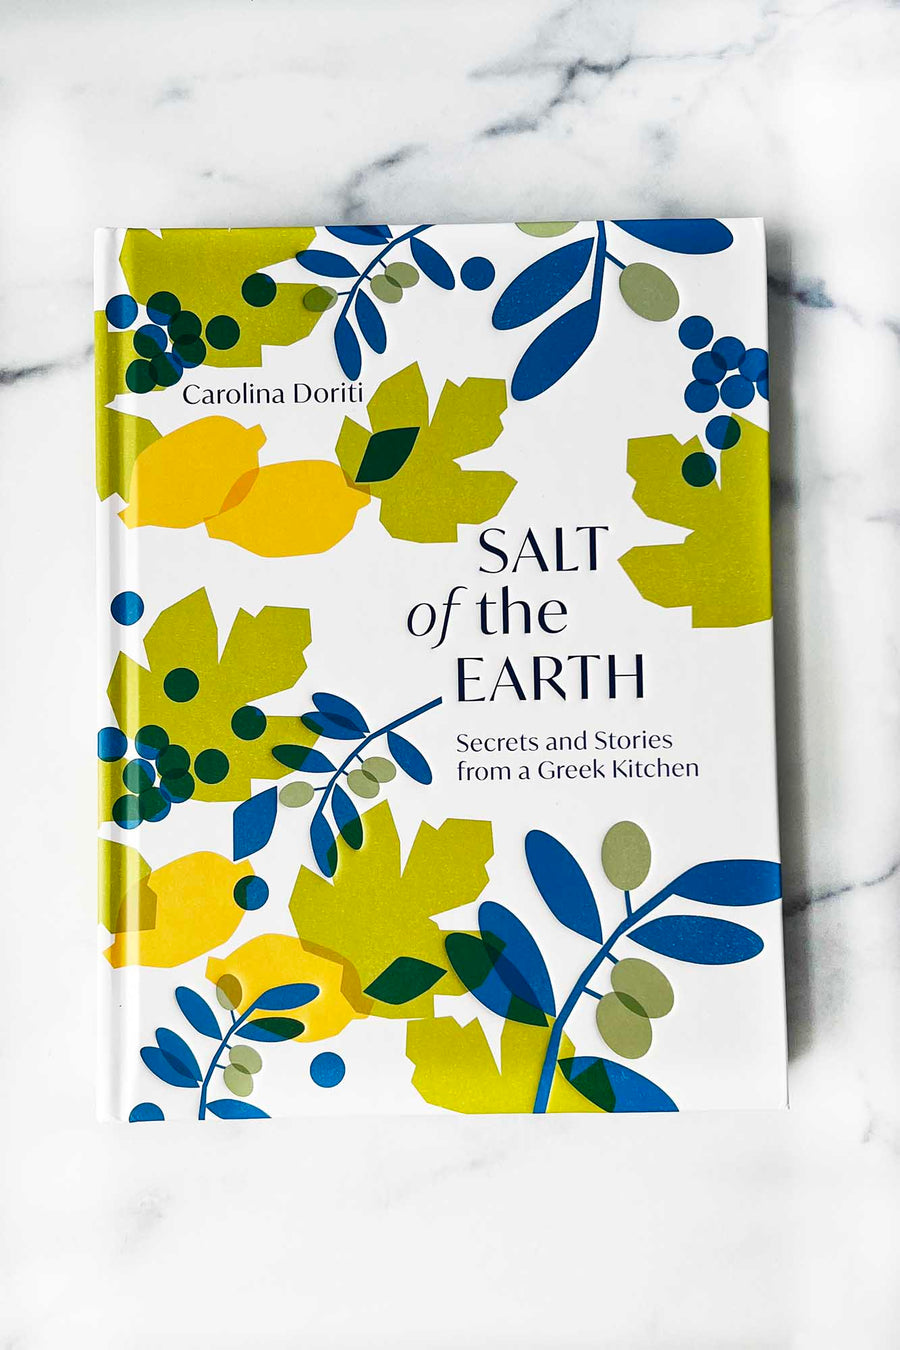 Salt of the Earth: Secrets and Stories from a Greek Kitchen